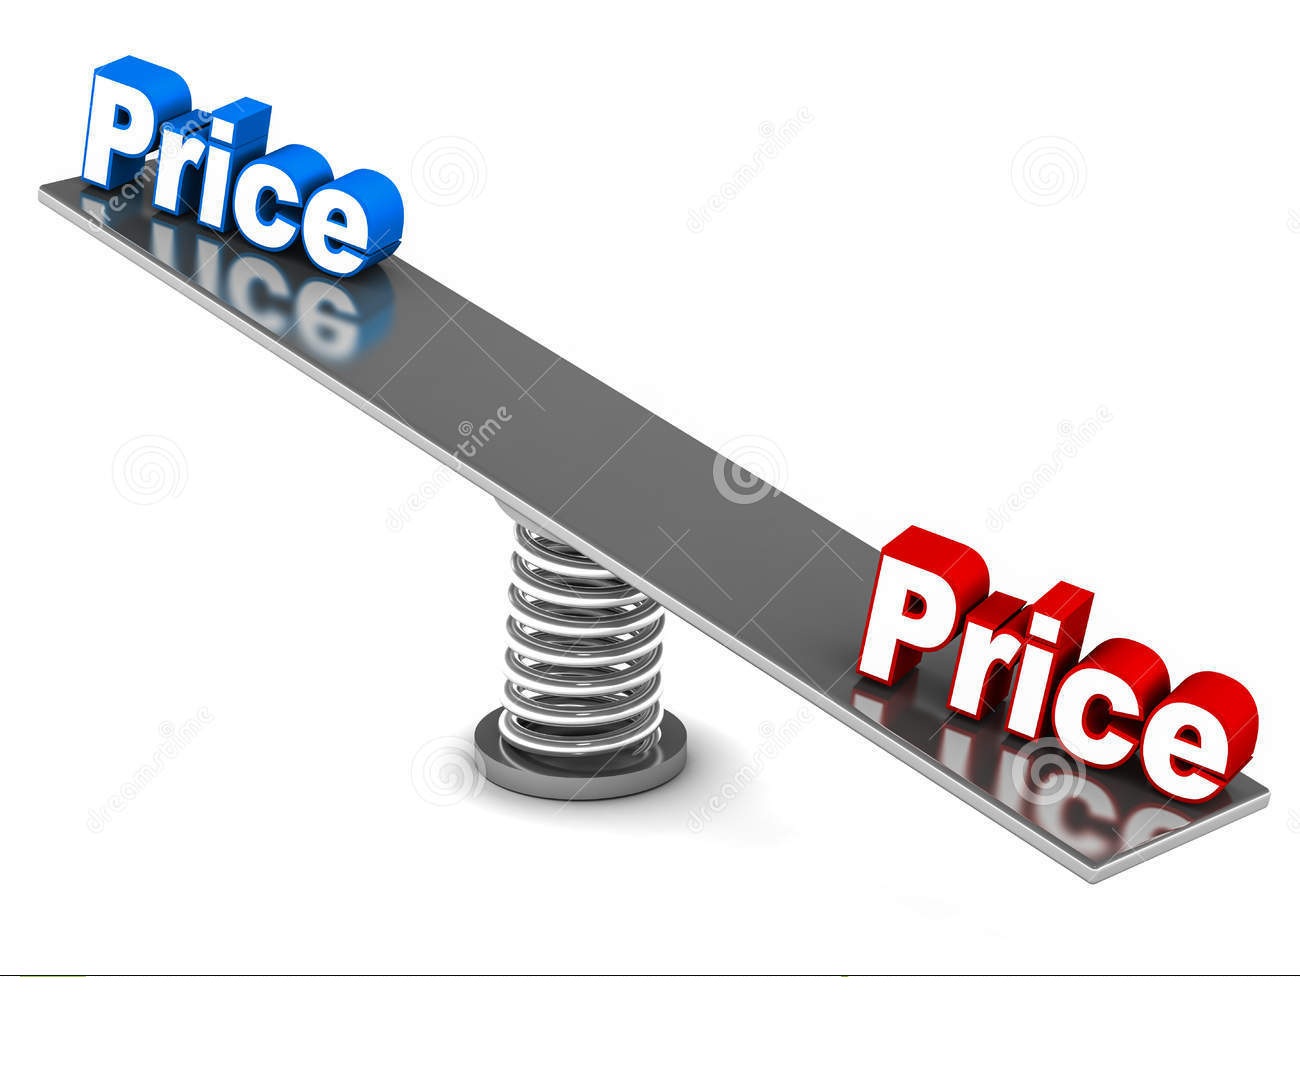 Compare prices from different providers